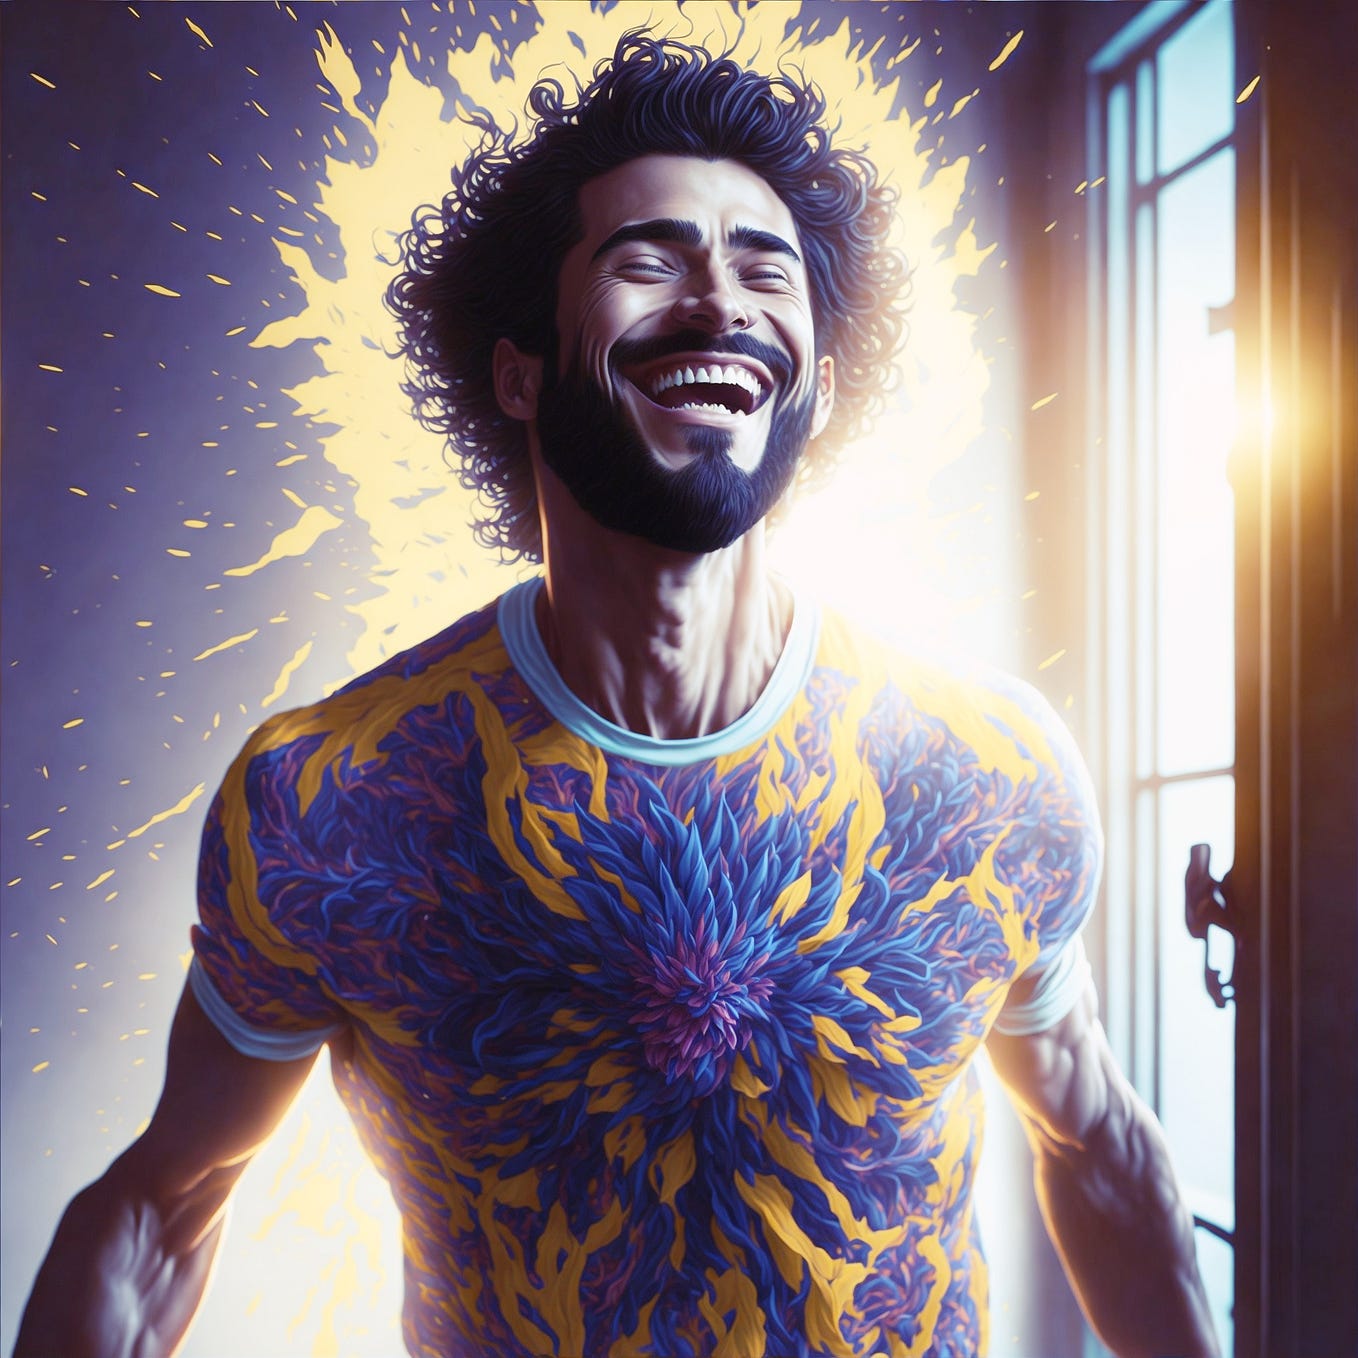 An AI-generated image of a man radiating vibrant energy and calm after his morning routine